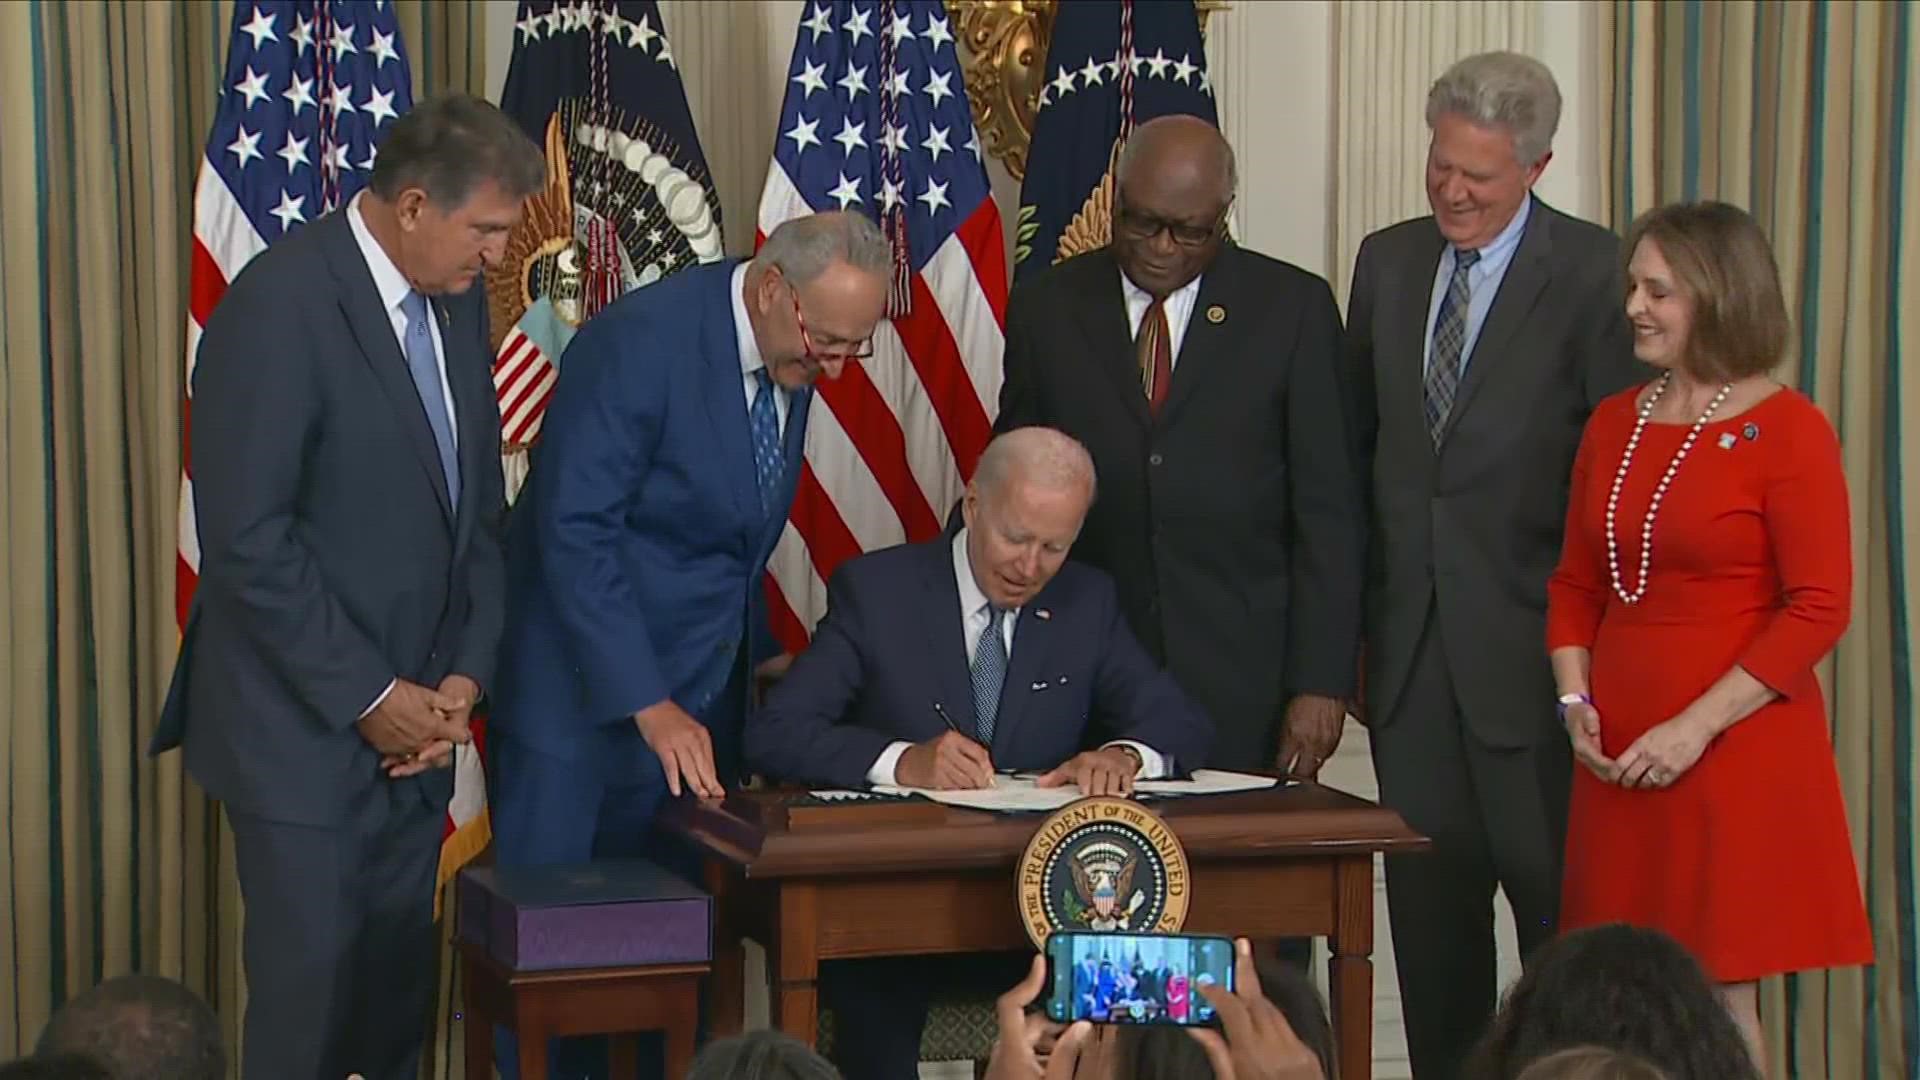 President Biden signed the Inflation Reduction Act on Tuesday, which includes the biggest federal investment ever to fight climate change and lowers healthcare cost.